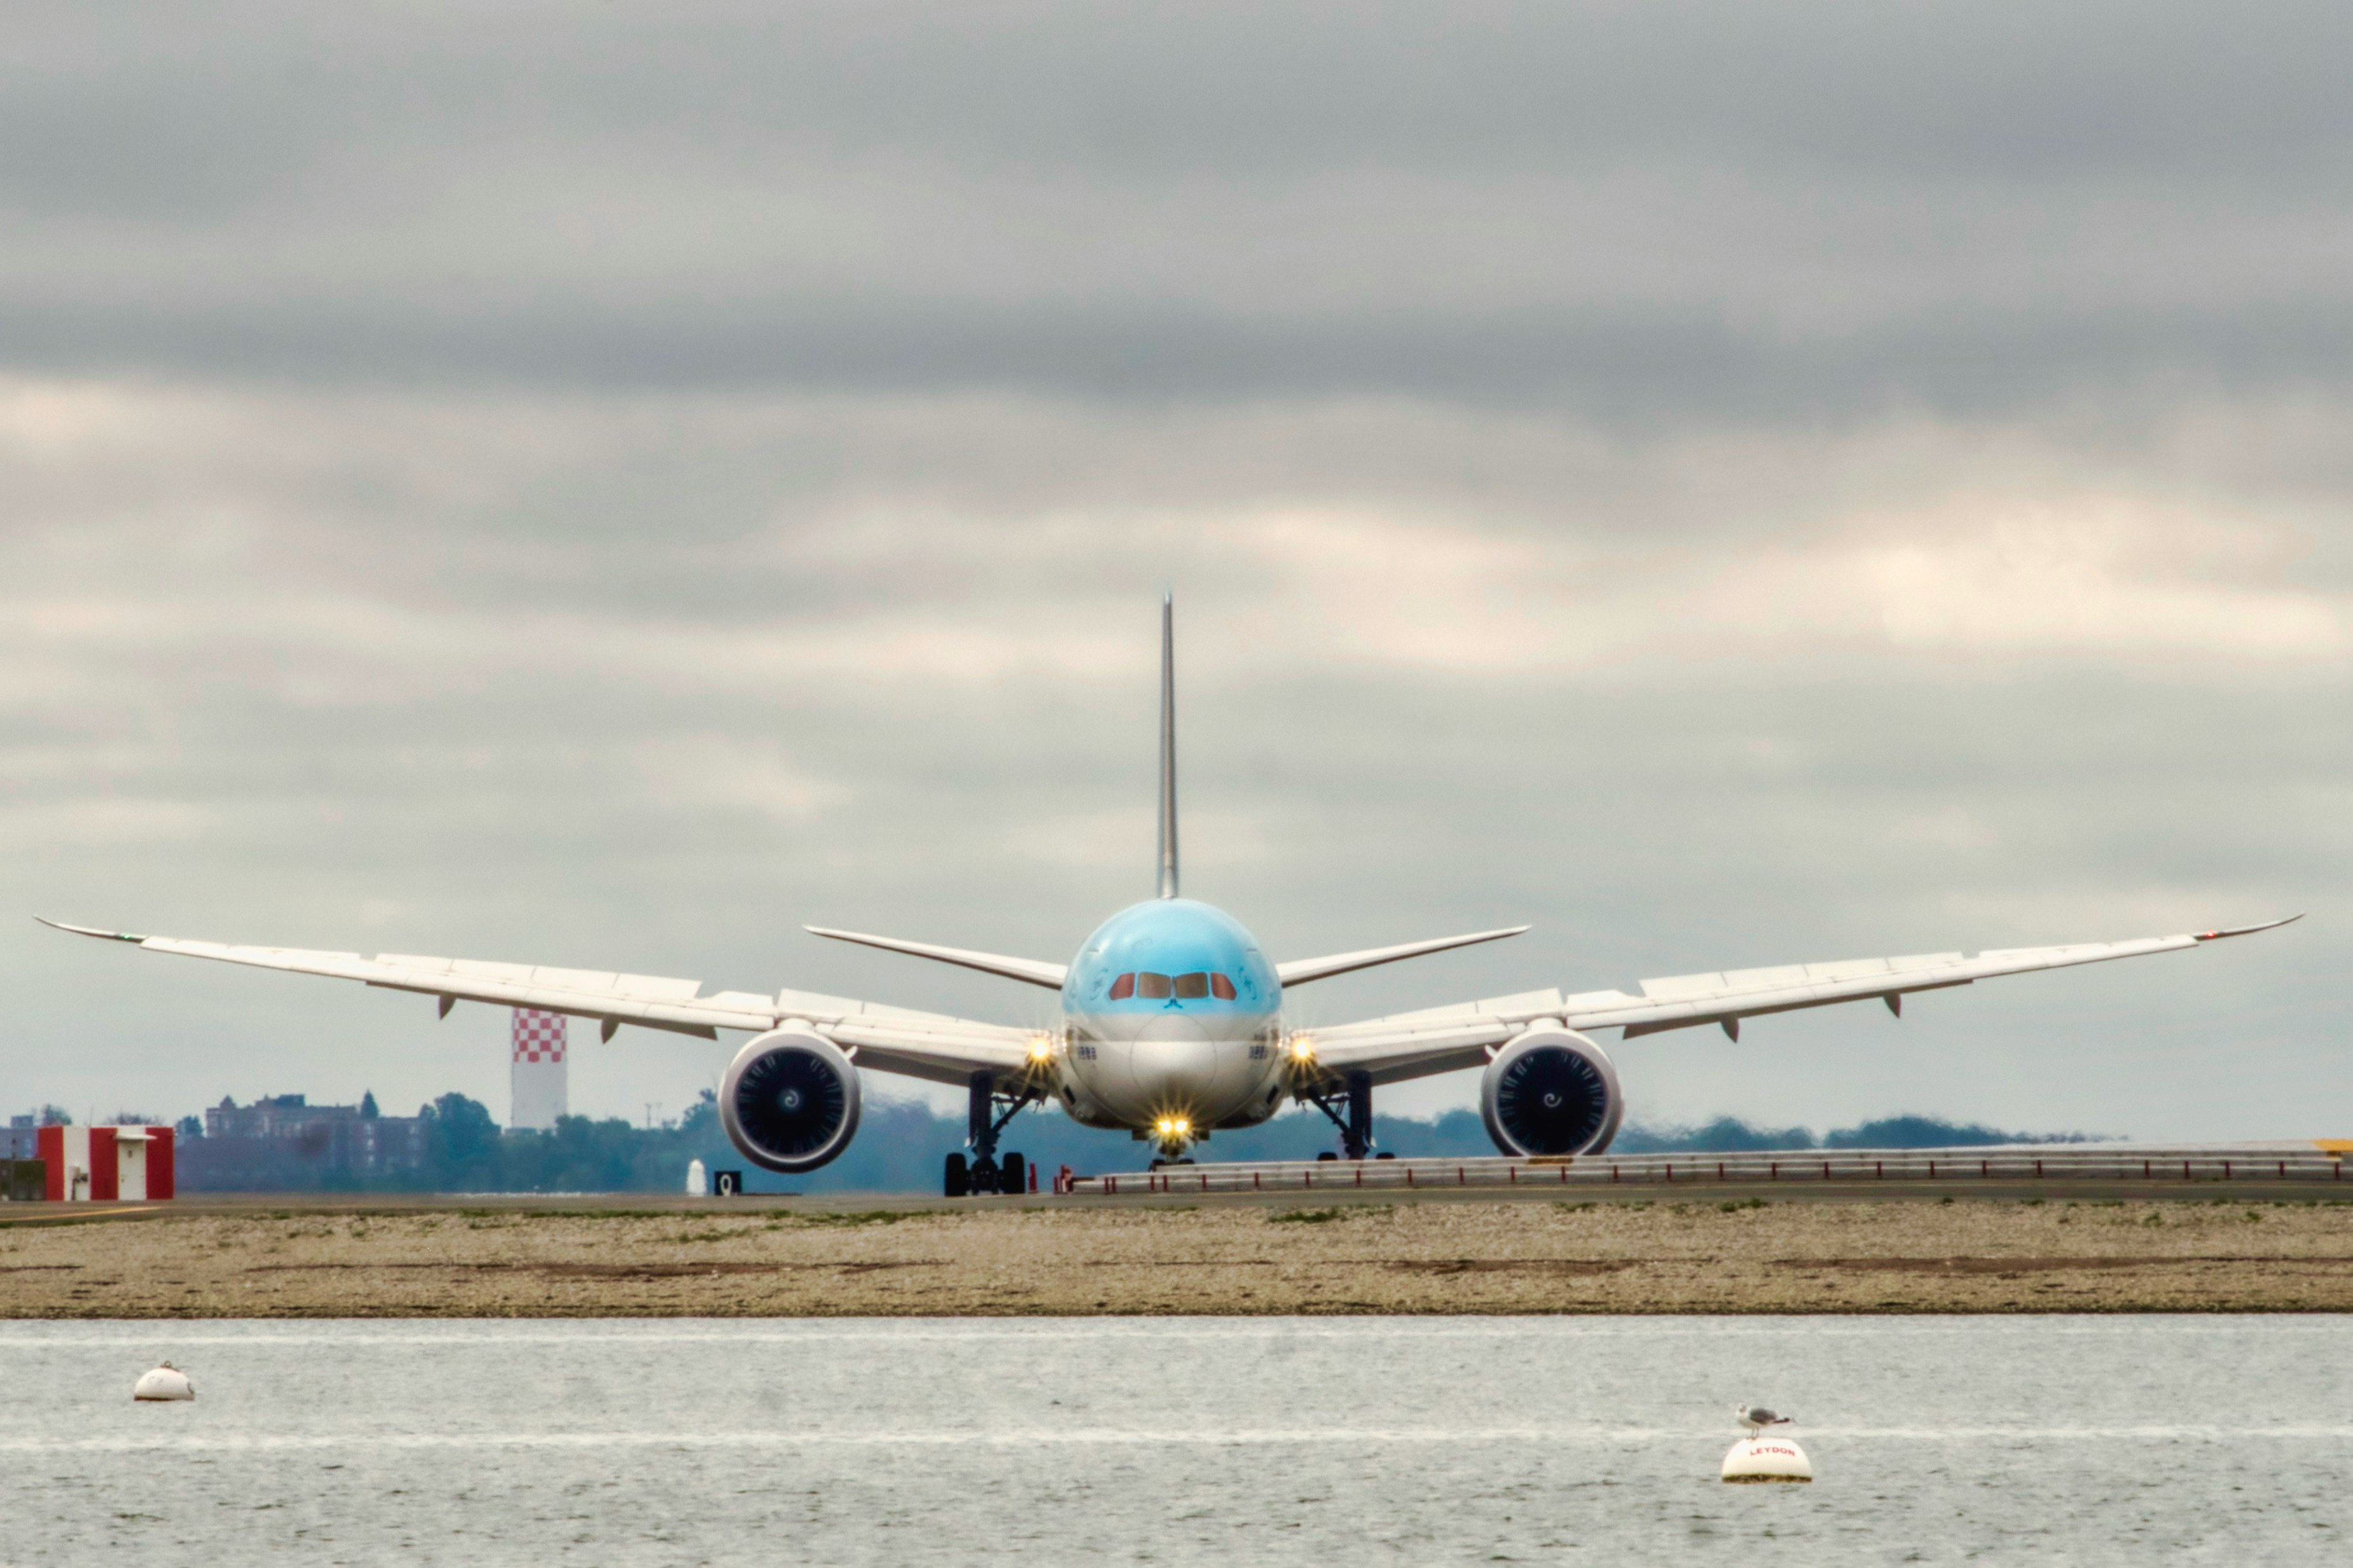 Korean Airliens' Seoul to Boston flight after landing at Logan Airport. The Boeing 787 flew almost 11,000km direct.